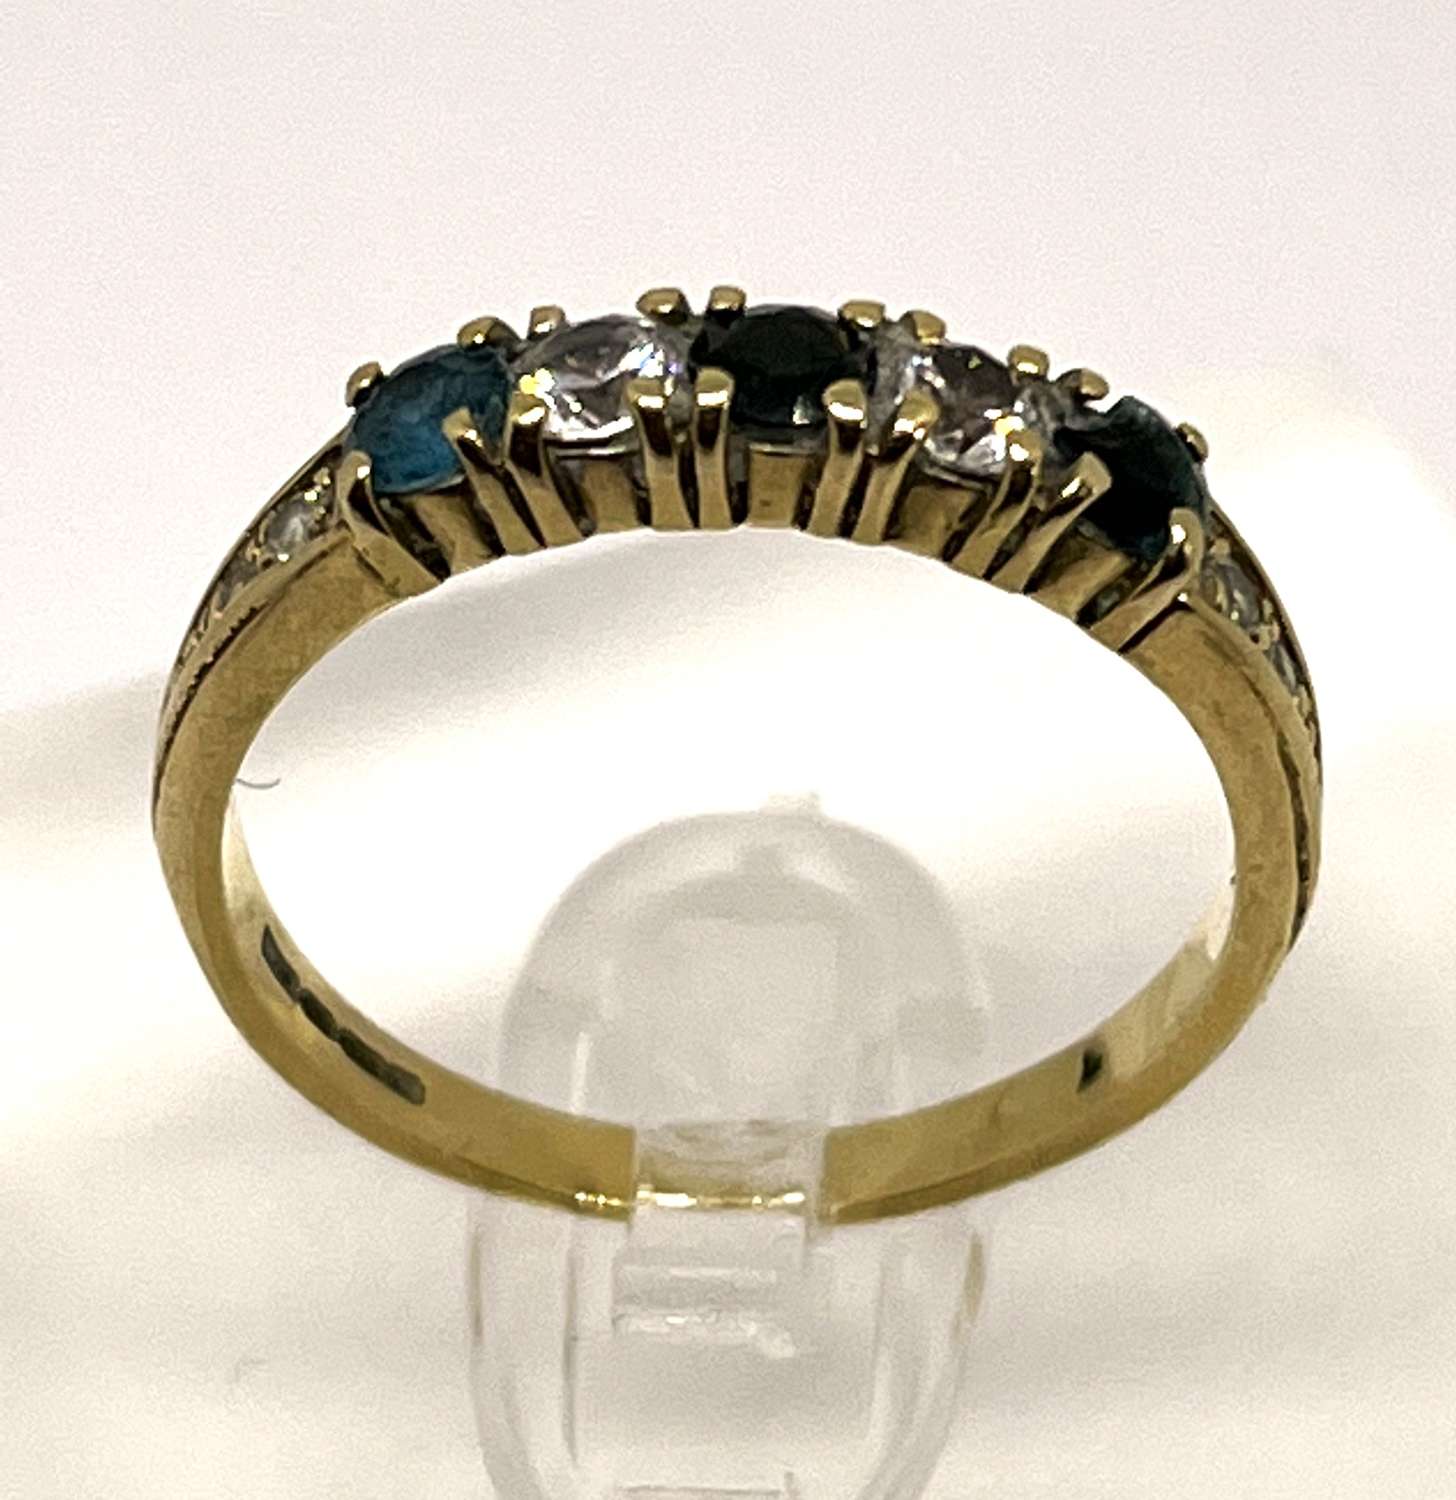 9ct Gold Ring With Alternating Stones